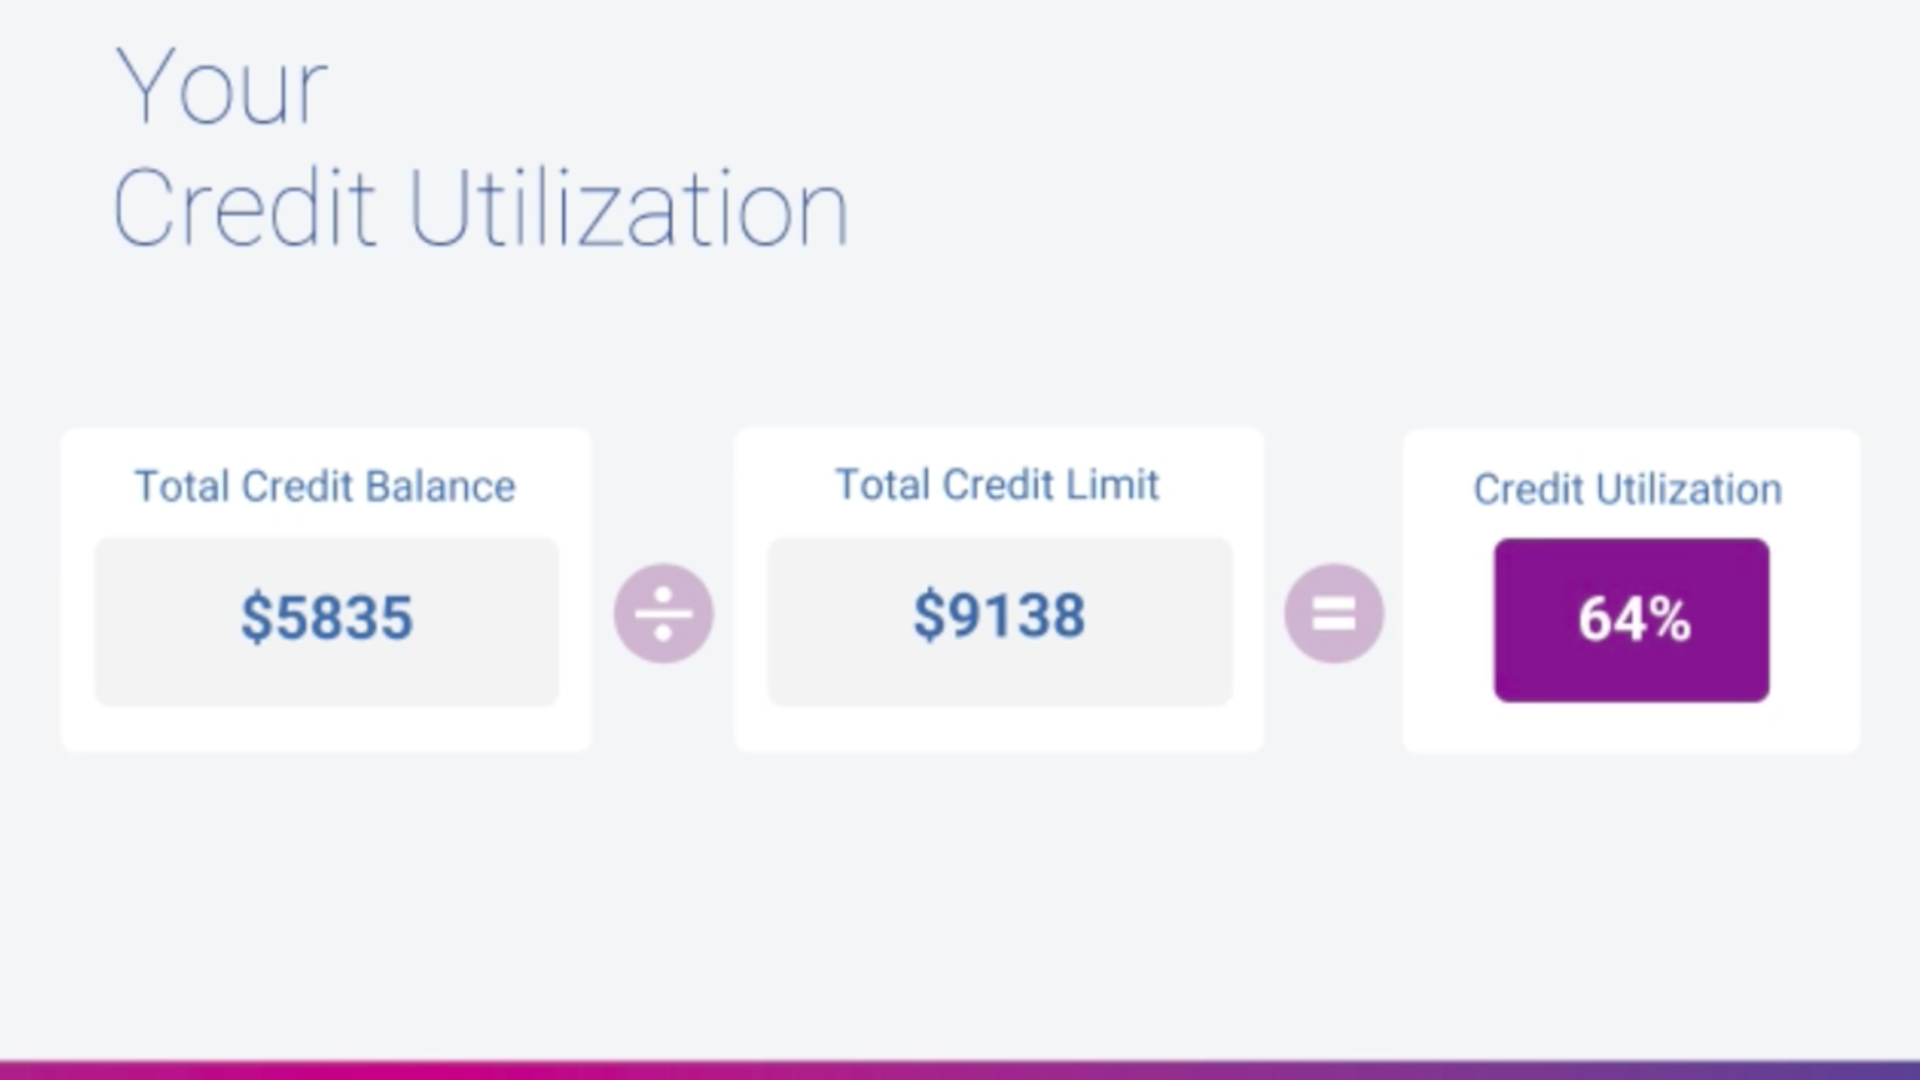 Personalized Credit Report Video Enhances Experian’s Customer Experience